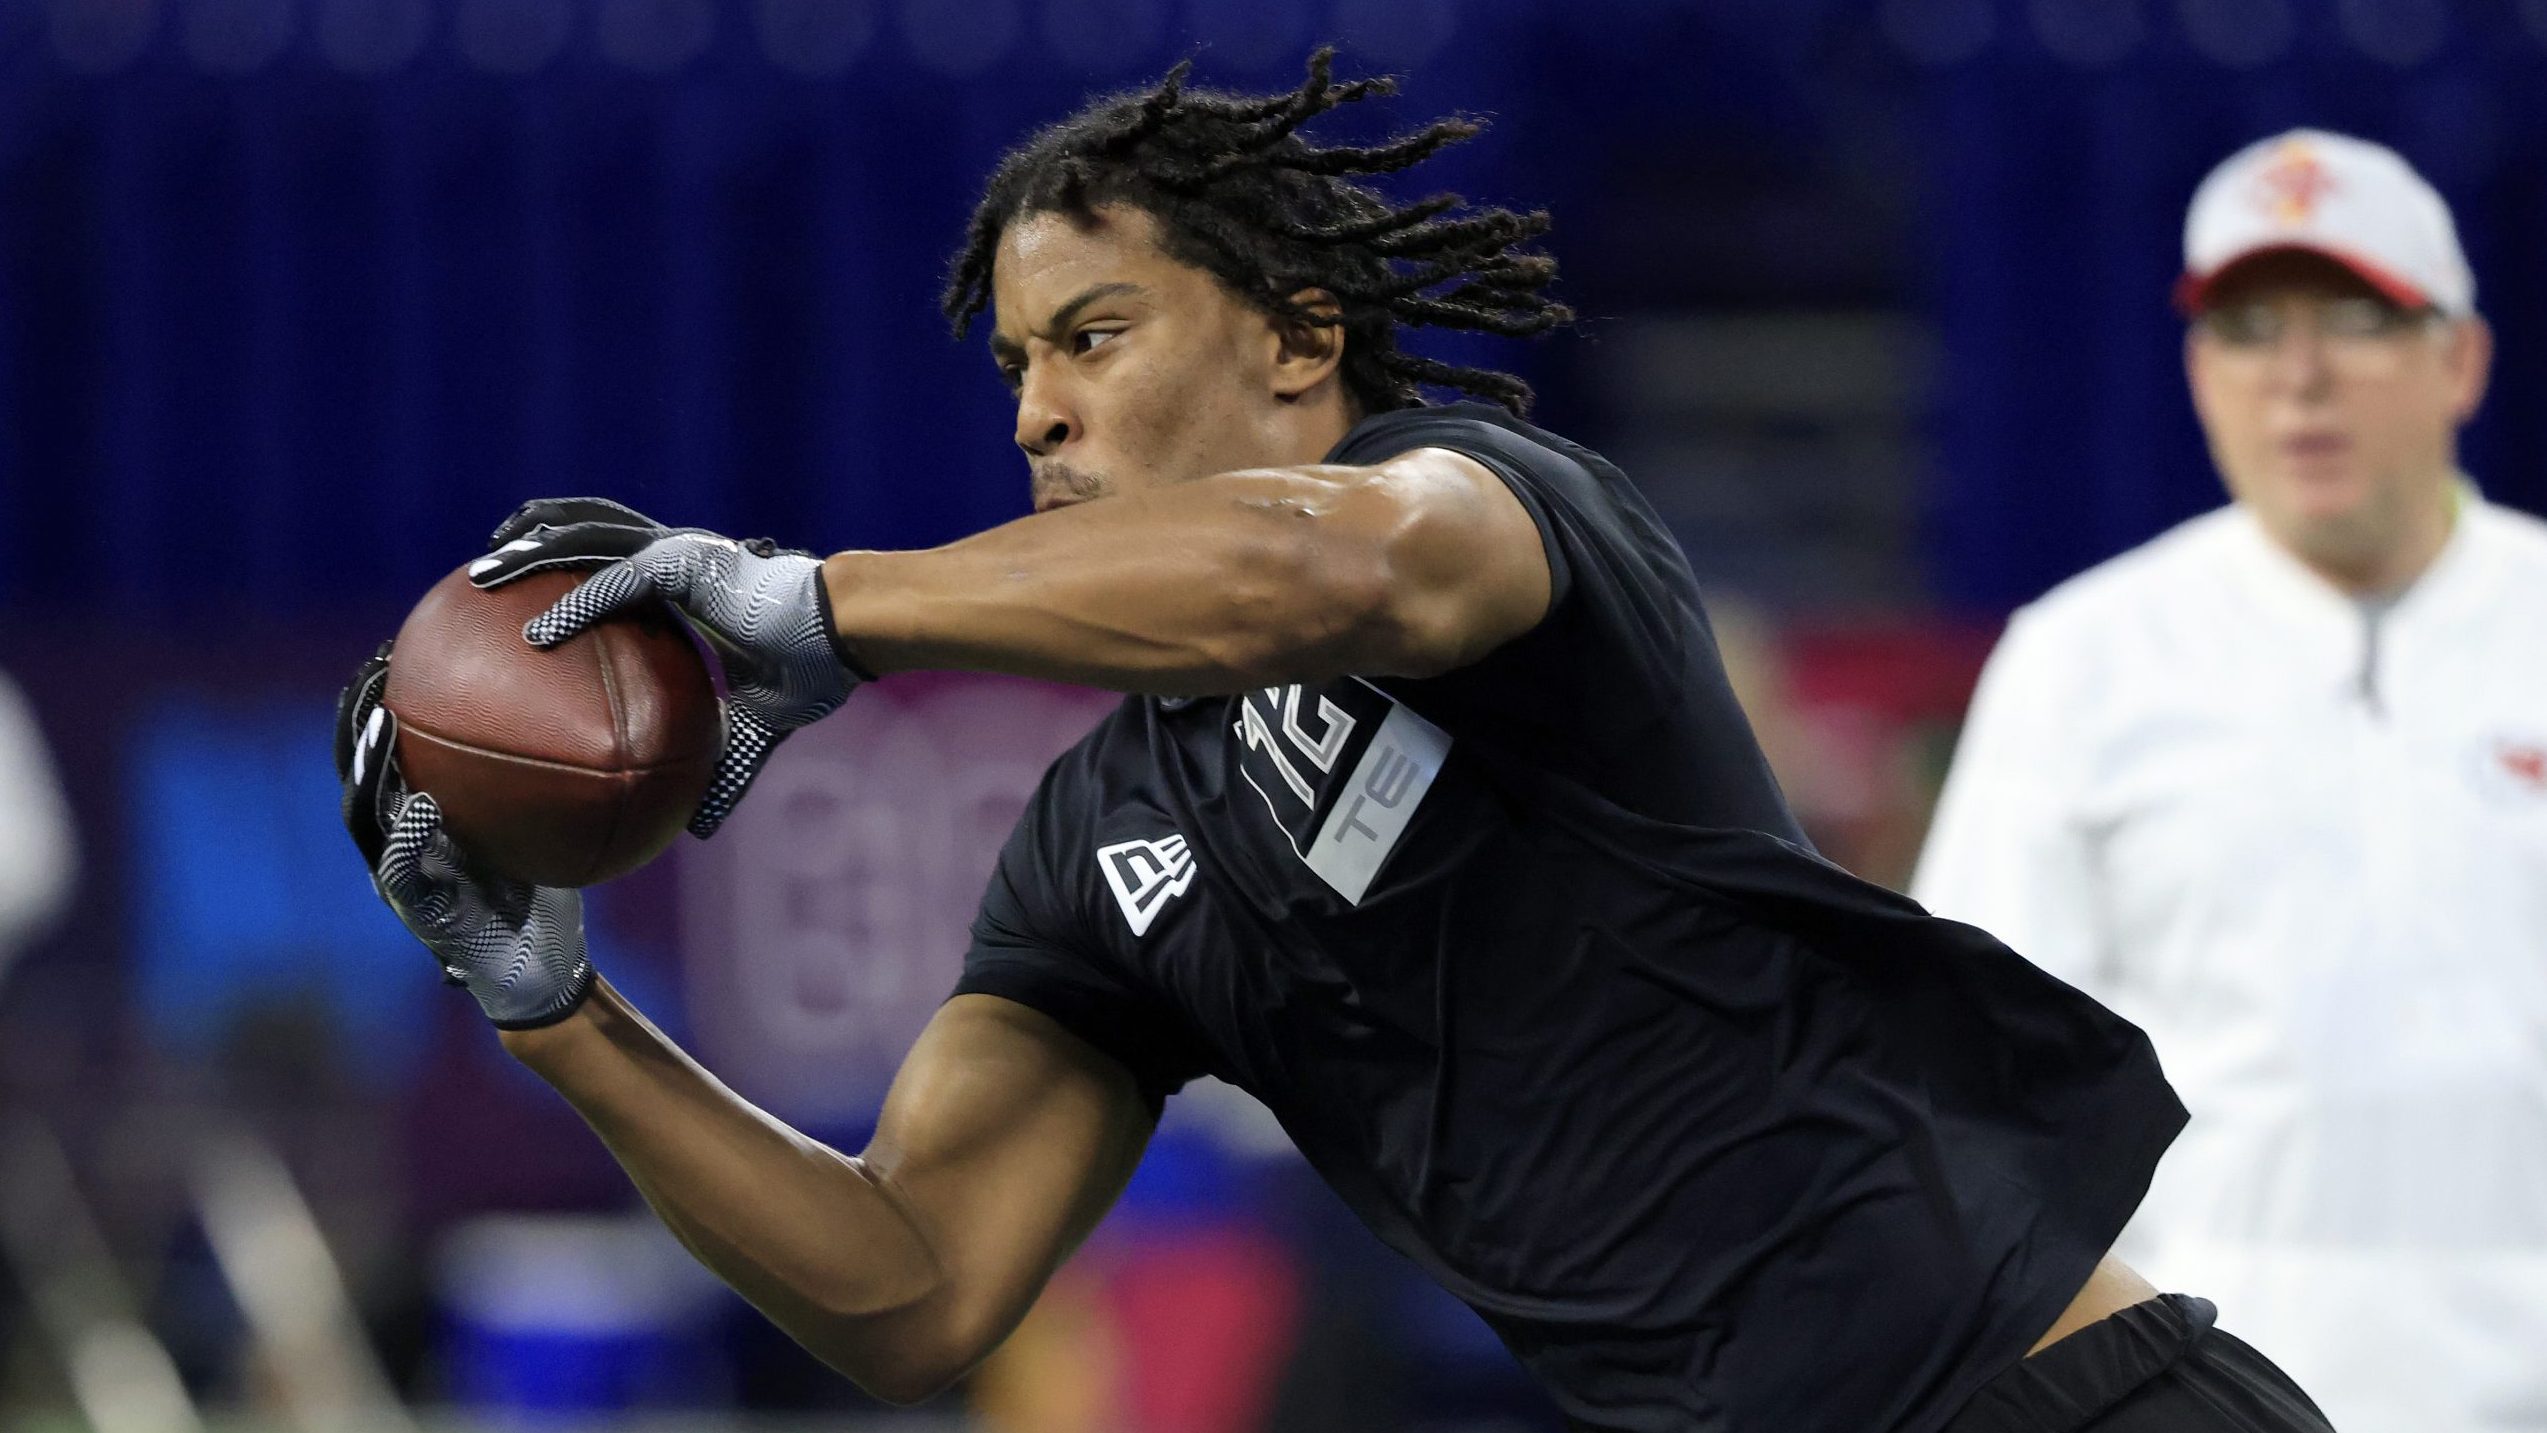 Isaiah Likely #TE12 of  Coastal Carolina runs a drill during the NFL Combine at Lucas Oil Stadium o...